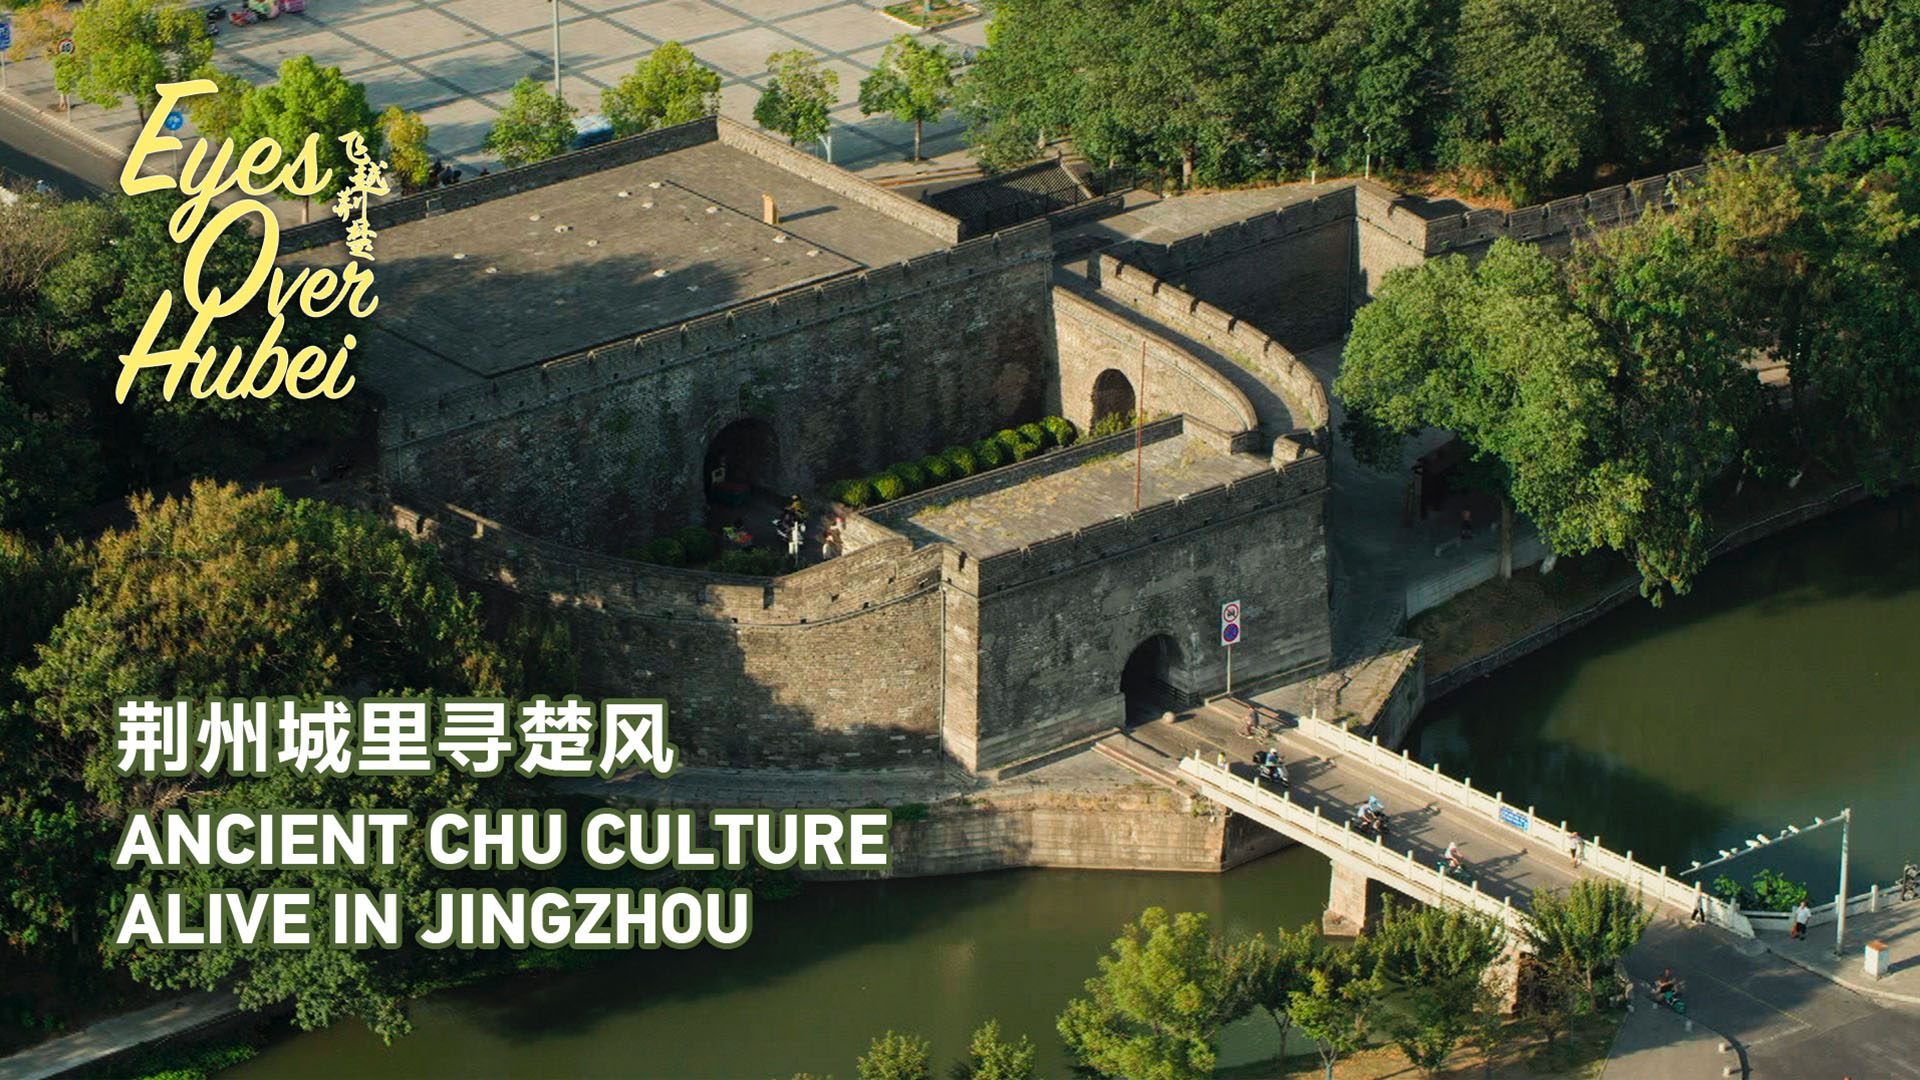 Eyes Over Hubei: Ancient Chu Culture alive in Jingzhou